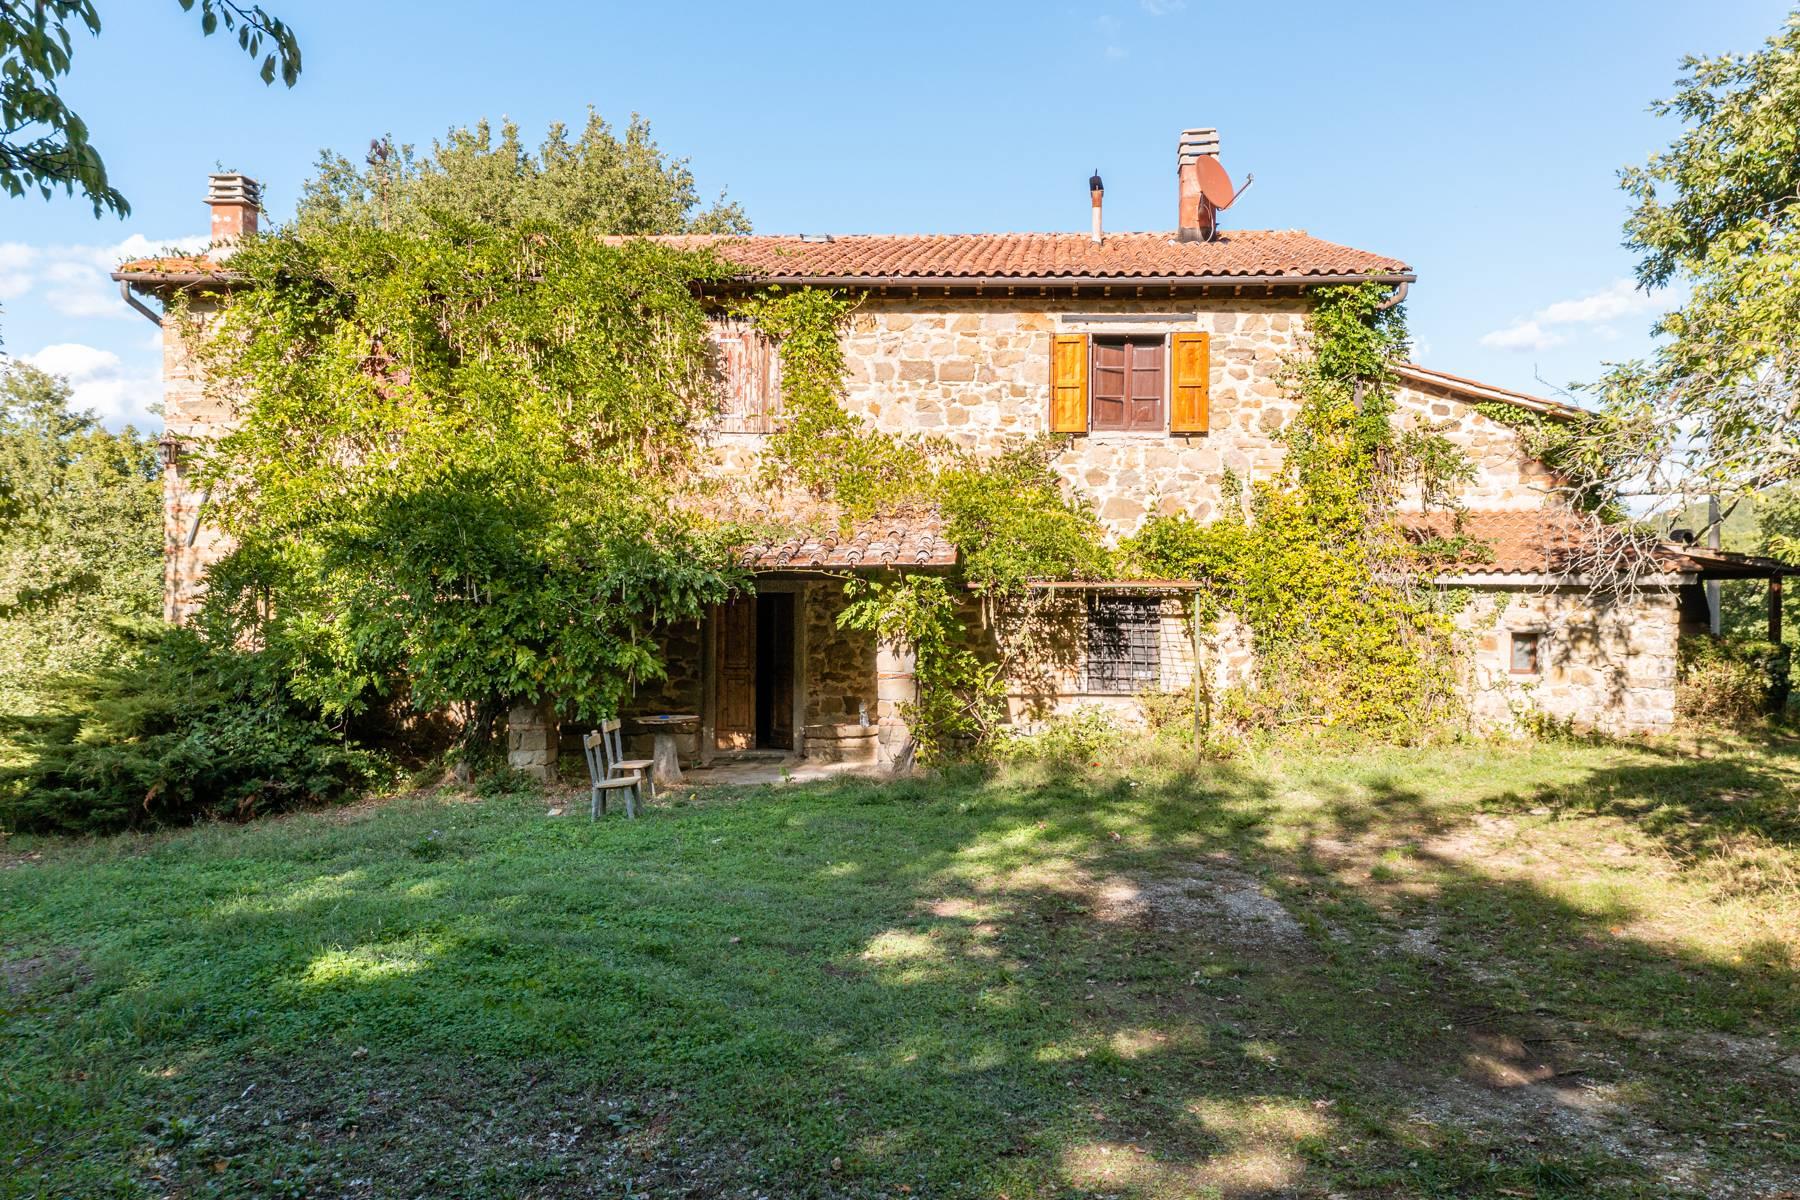 Majestic 16th century villa in the Tuscan countryside - 29